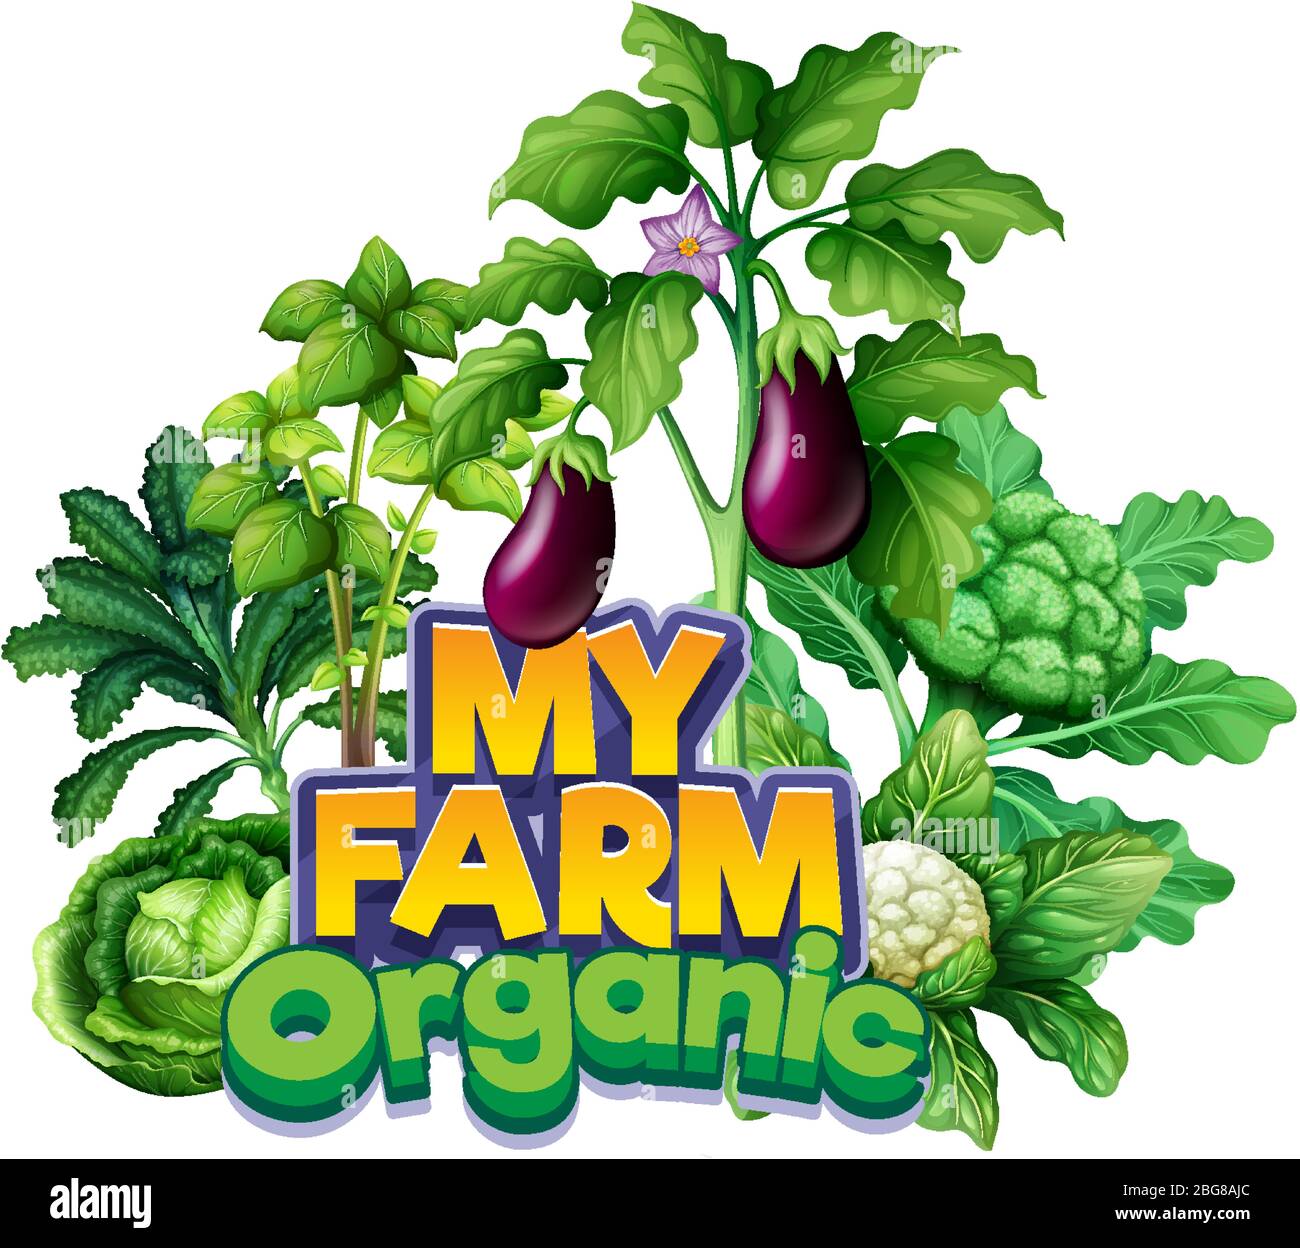 Font design for word my farm with different types of vegetables illustration Stock Vector